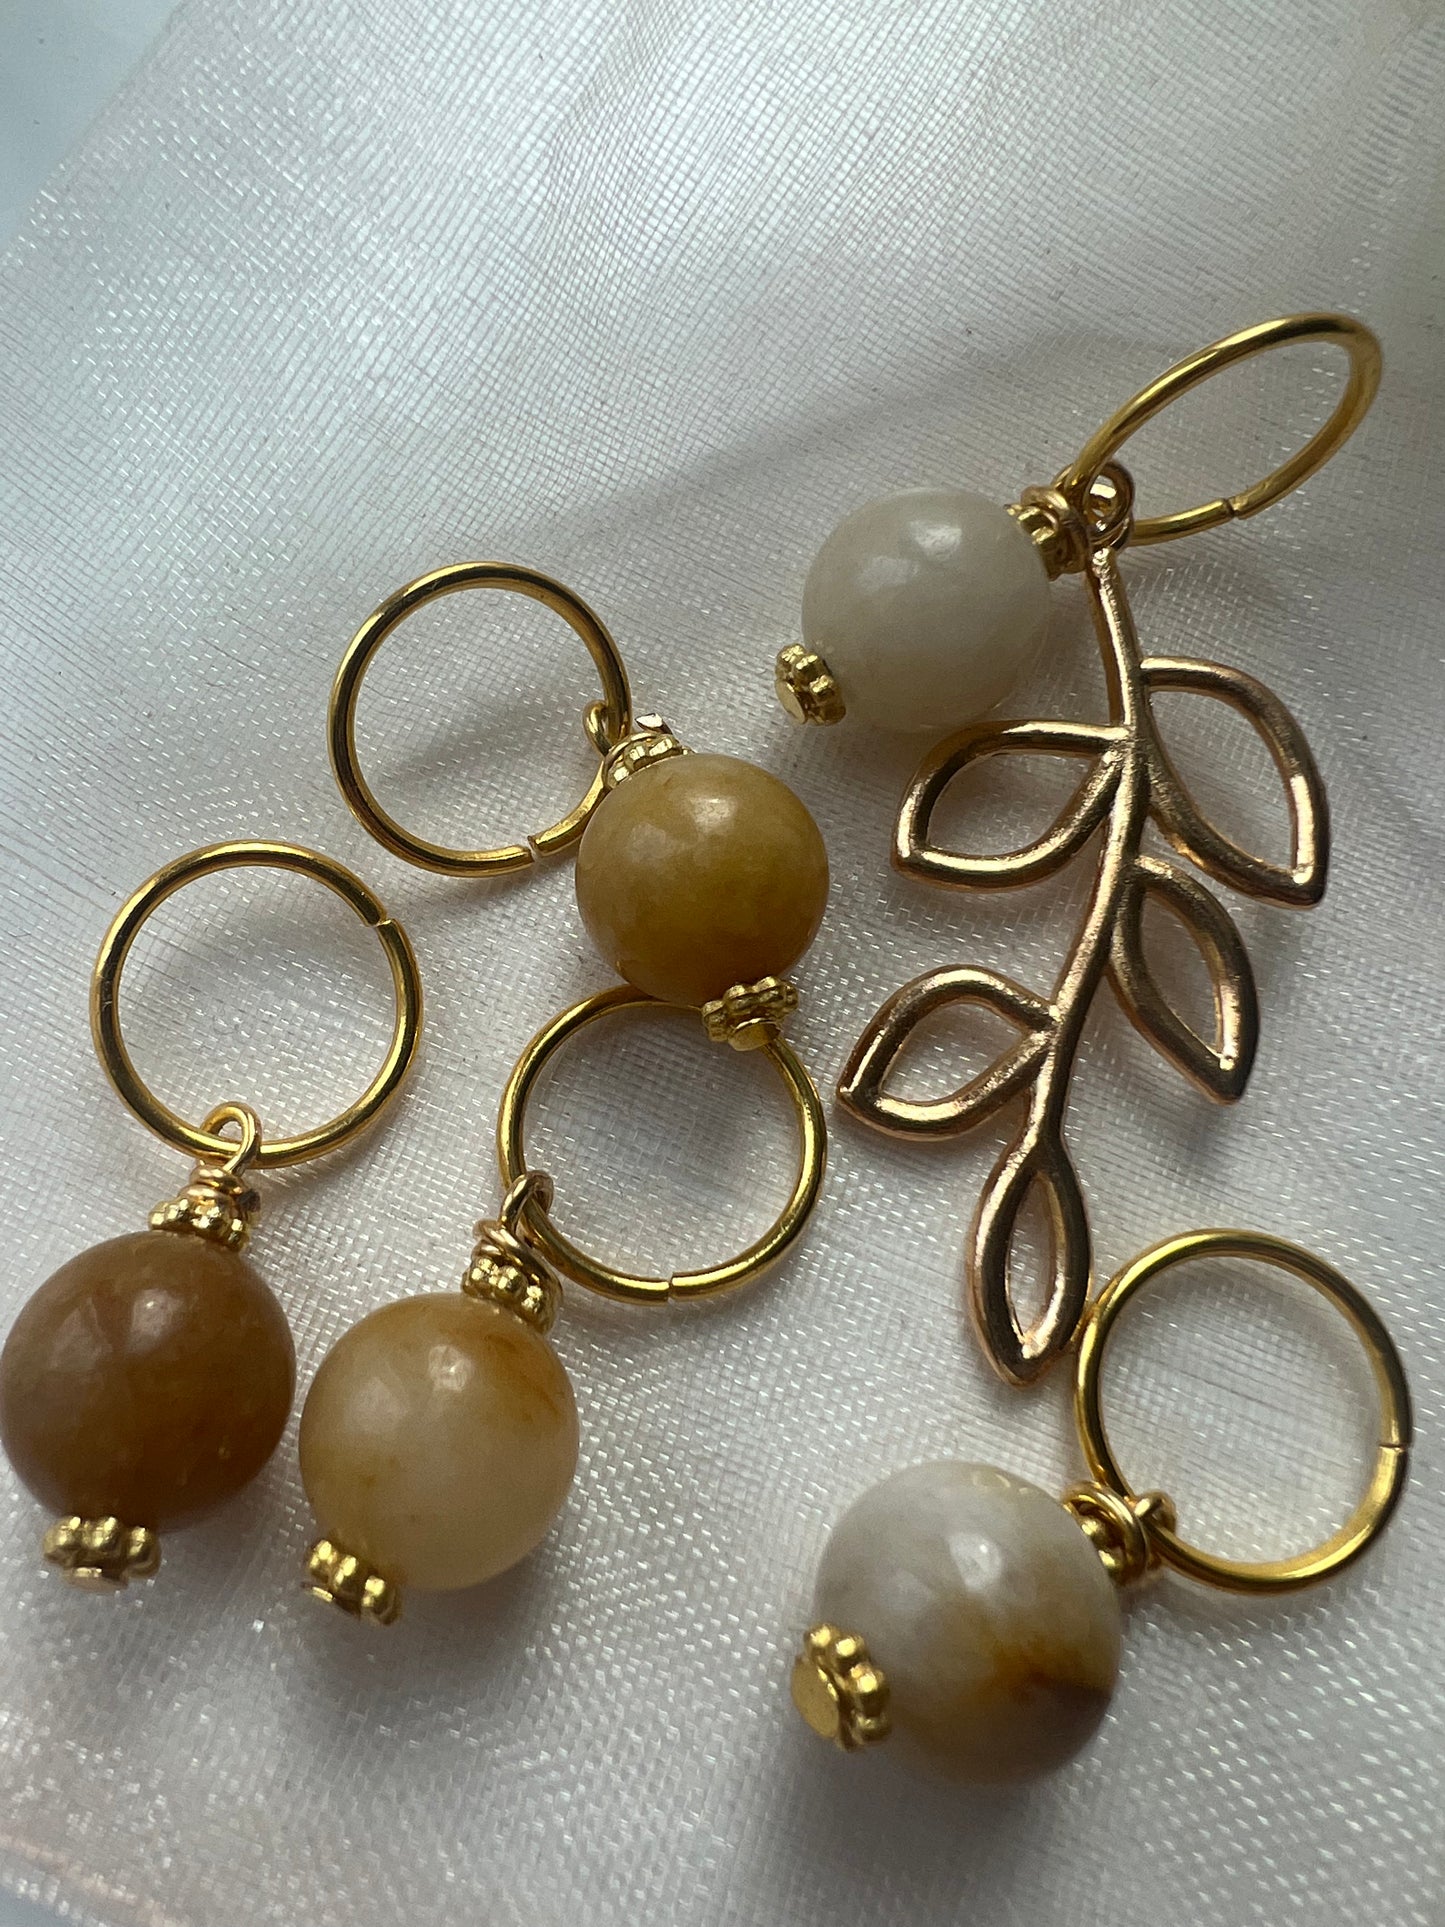 Stitch markers in brownish shades with a beautiful lap marker, 5 pcs.